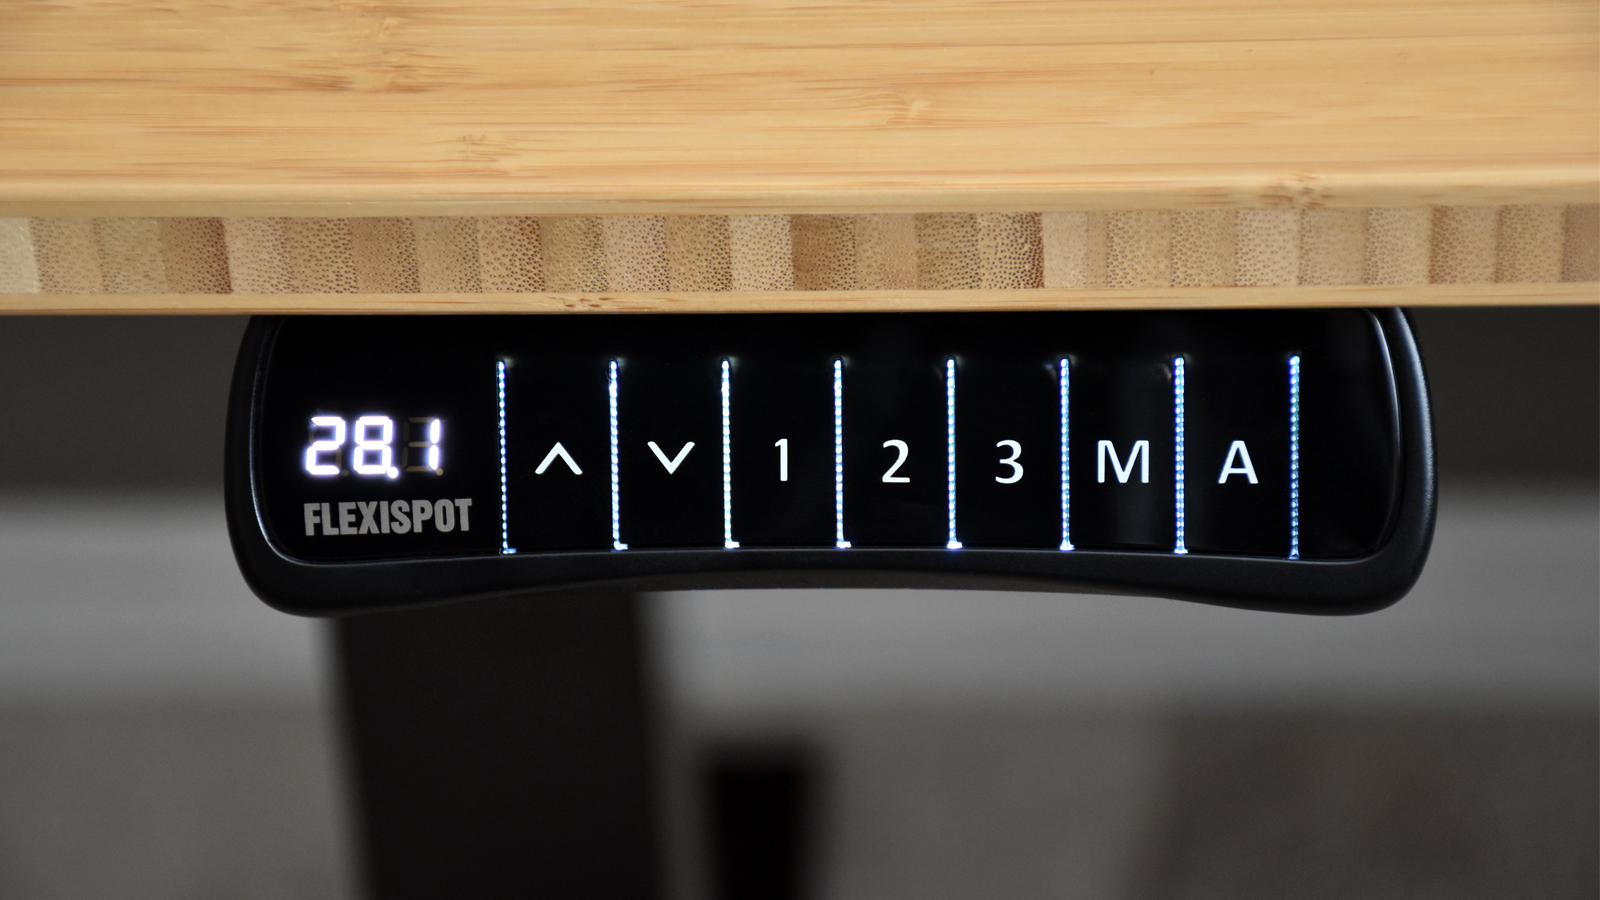 Close-up of the Flexispot Kana's hand switch control panel with LED display and preset buttons